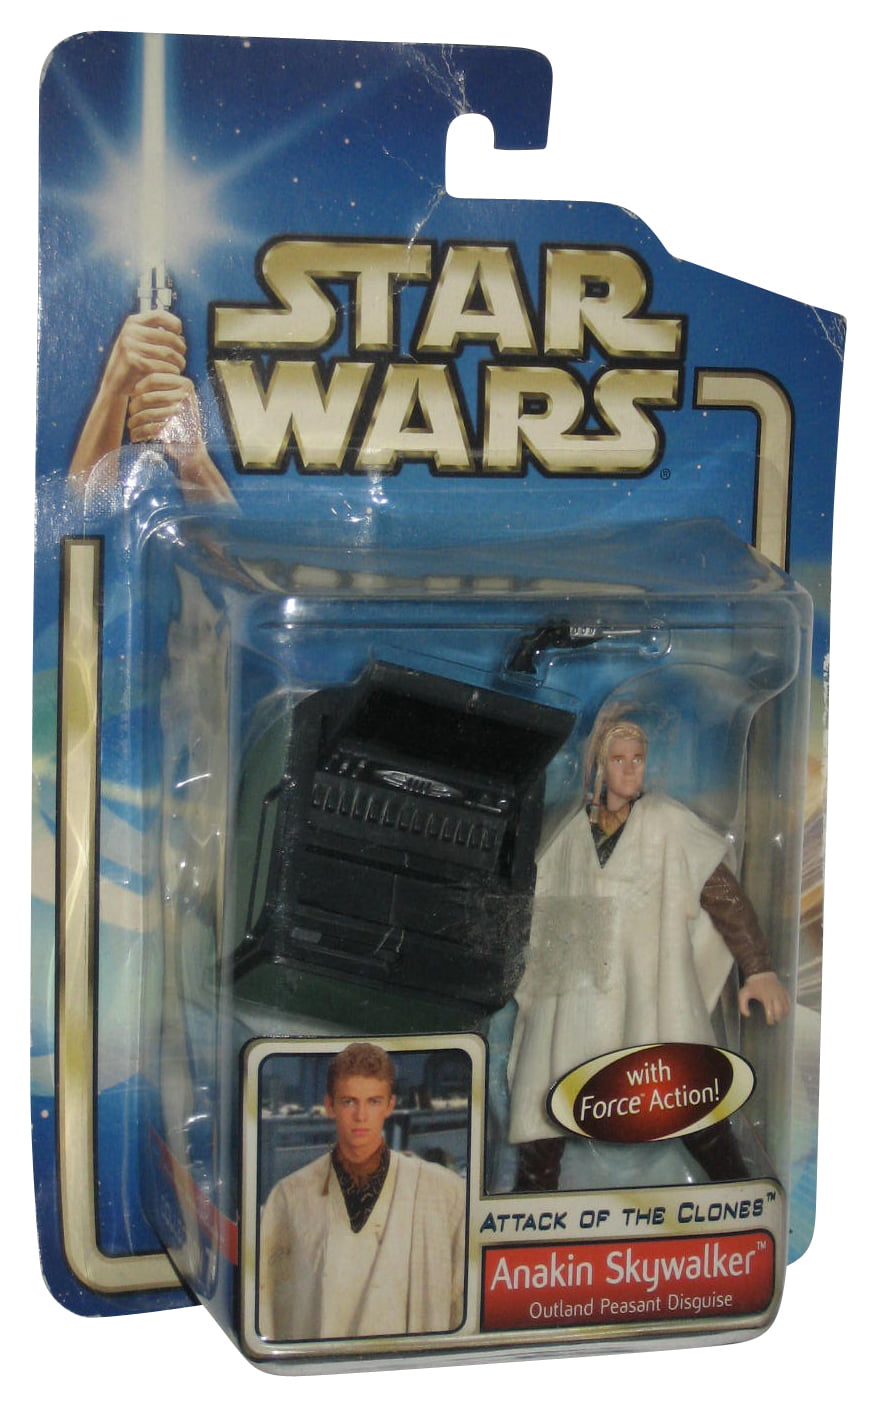 Anakin Skywalker Outland Peasant New! Hasbro Star Wars Attack Of The Clones 